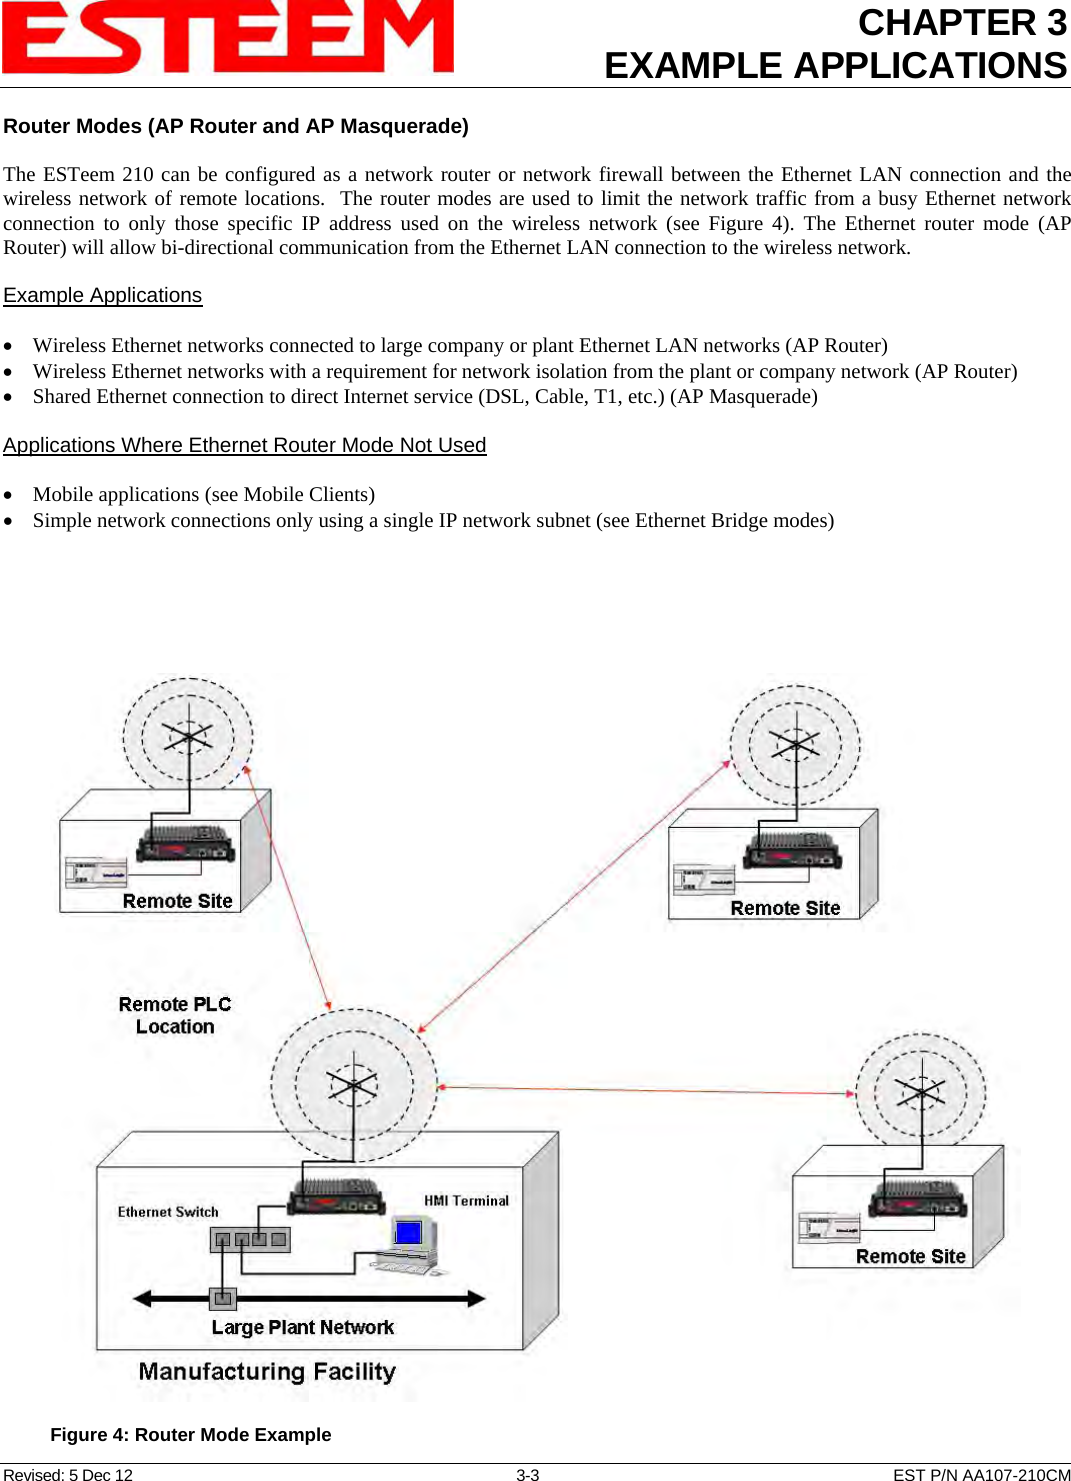 CHAPTER 3 EXAMPLE APPLICATIONS  Router Modes (AP Router and AP Masquerade)  The ESTeem 210 can be configured as a network router or network firewall between the Ethernet LAN connection and the wireless network of remote locations.  The router modes are used to limit the network traffic from a busy Ethernet network connection to only those specific IP address used on the wireless network (see Figure 4). The Ethernet router mode (AP Router) will allow bi-directional communication from the Ethernet LAN connection to the wireless network.  Example Applications  • Wireless Ethernet networks connected to large company or plant Ethernet LAN networks (AP Router) • Wireless Ethernet networks with a requirement for network isolation from the plant or company network (AP Router) • Shared Ethernet connection to direct Internet service (DSL, Cable, T1, etc.) (AP Masquerade)  Applications Where Ethernet Router Mode Not Used  • Mobile applications (see Mobile Clients) • Simple network connections only using a single IP network subnet (see Ethernet Bridge modes)    Figure 4: Router Mode Example Revised: 5 Dec 12  3-3  EST P/N AA107-210CM 